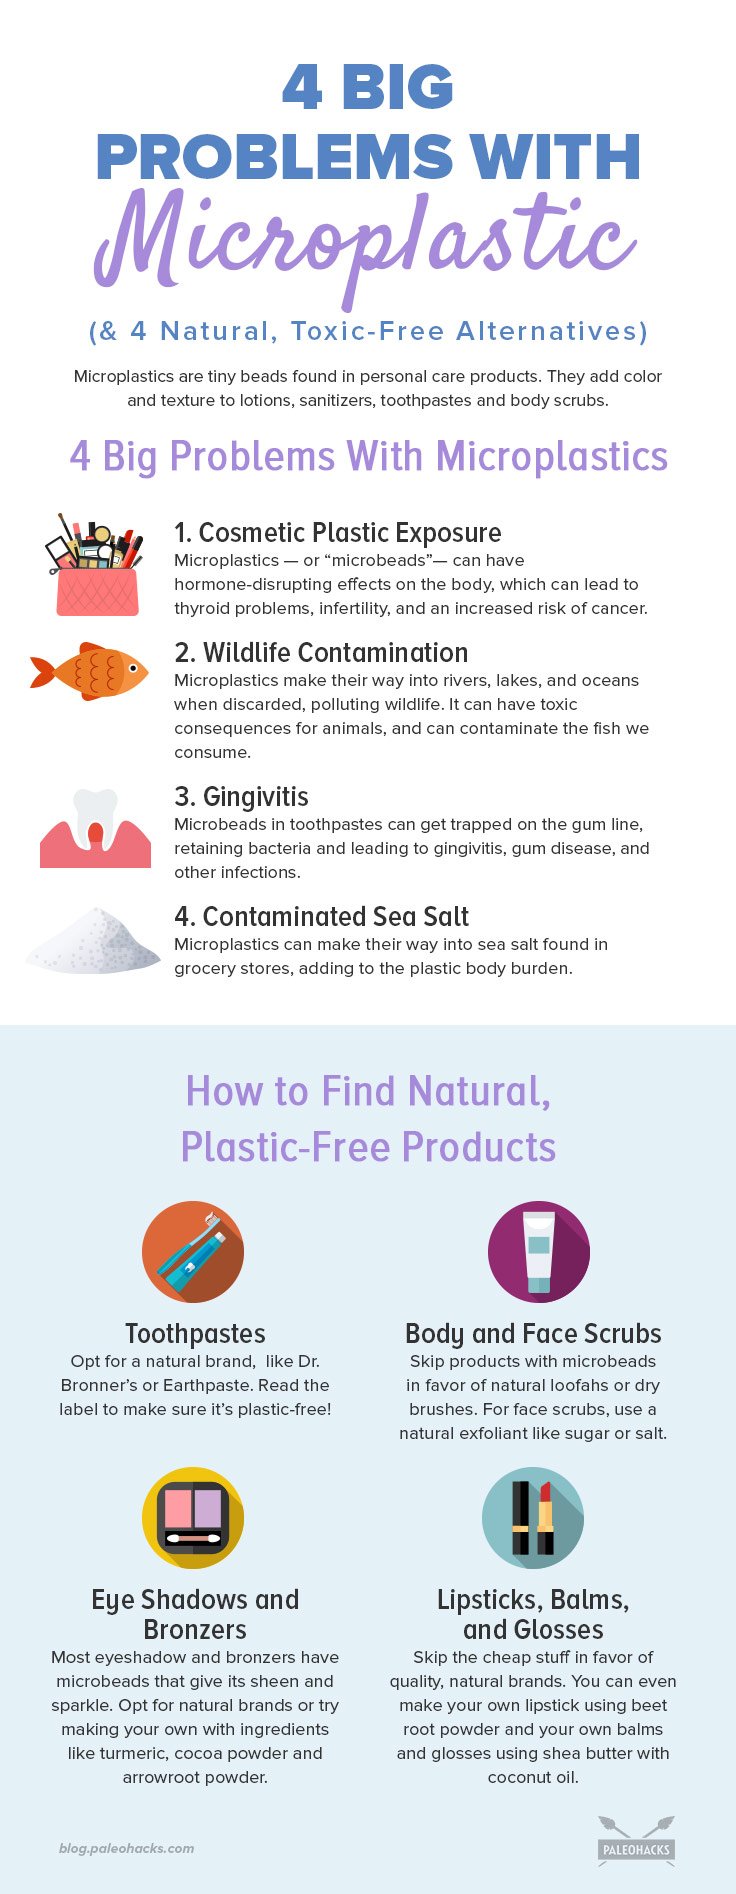 The problems with microplastics is that they are comprised of various different types of plastic, which have their own concerning effects on human health